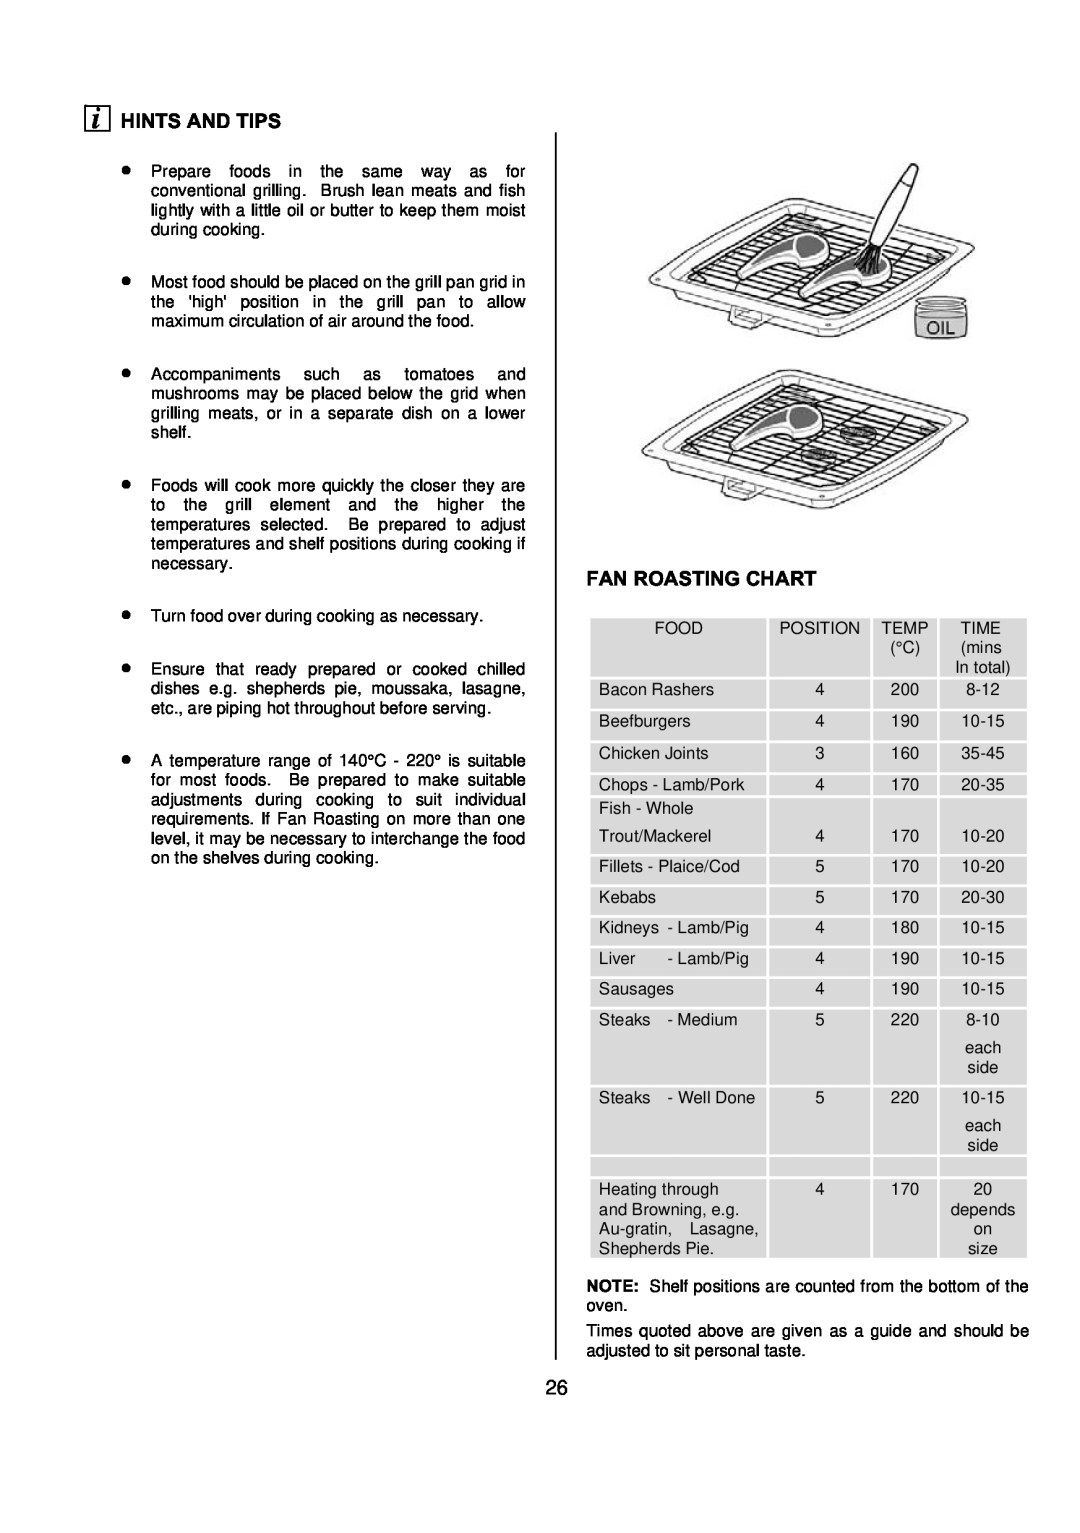 Electrolux D77000 user manual Fan Roasting Chart, Hints And Tips 